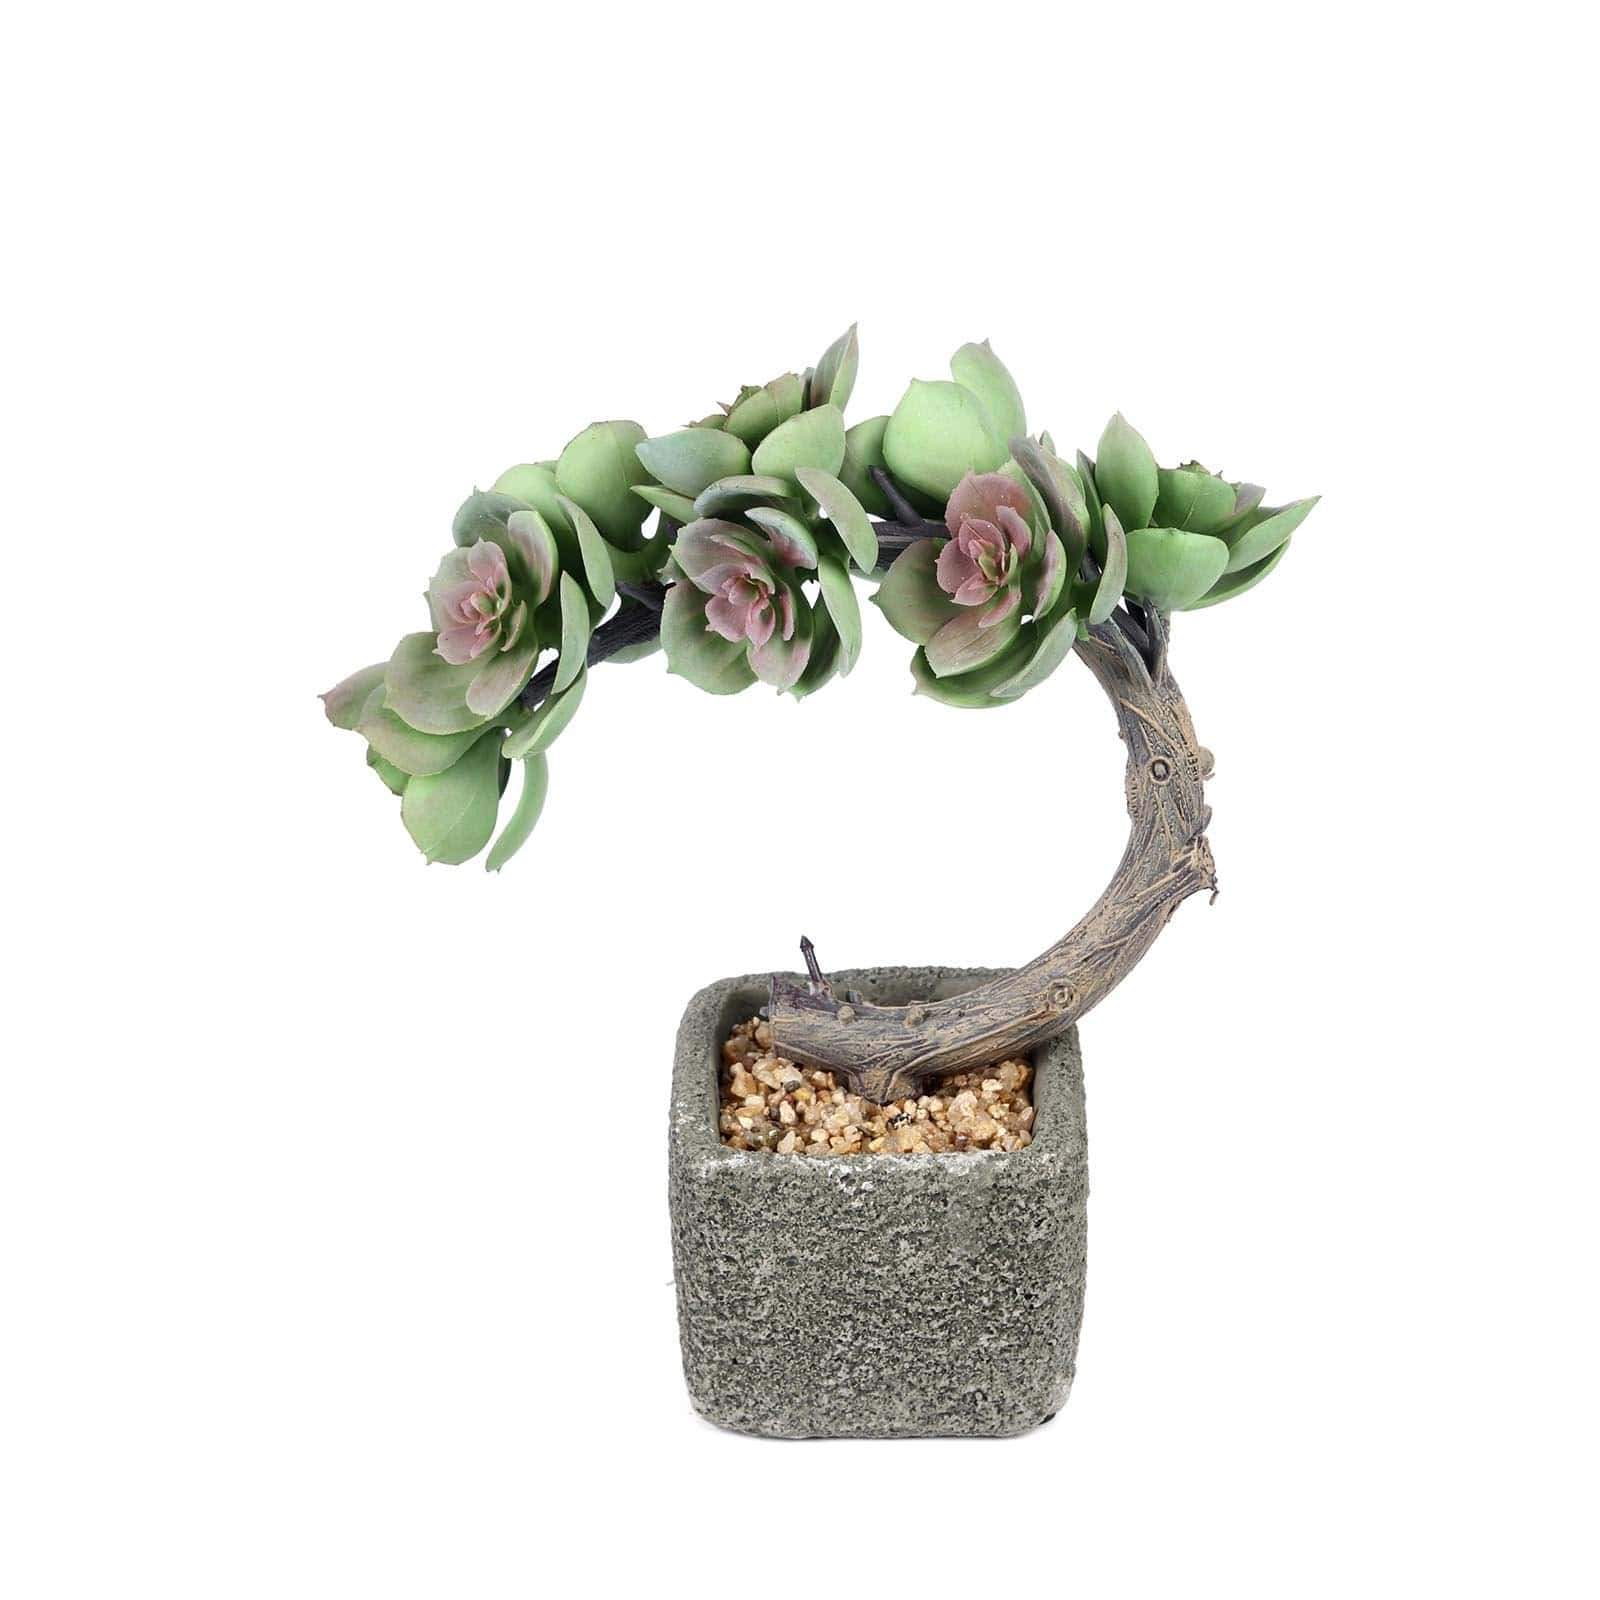 8 in tall Concrete Planter Pot with Green Artificial Mini Succulents Tree